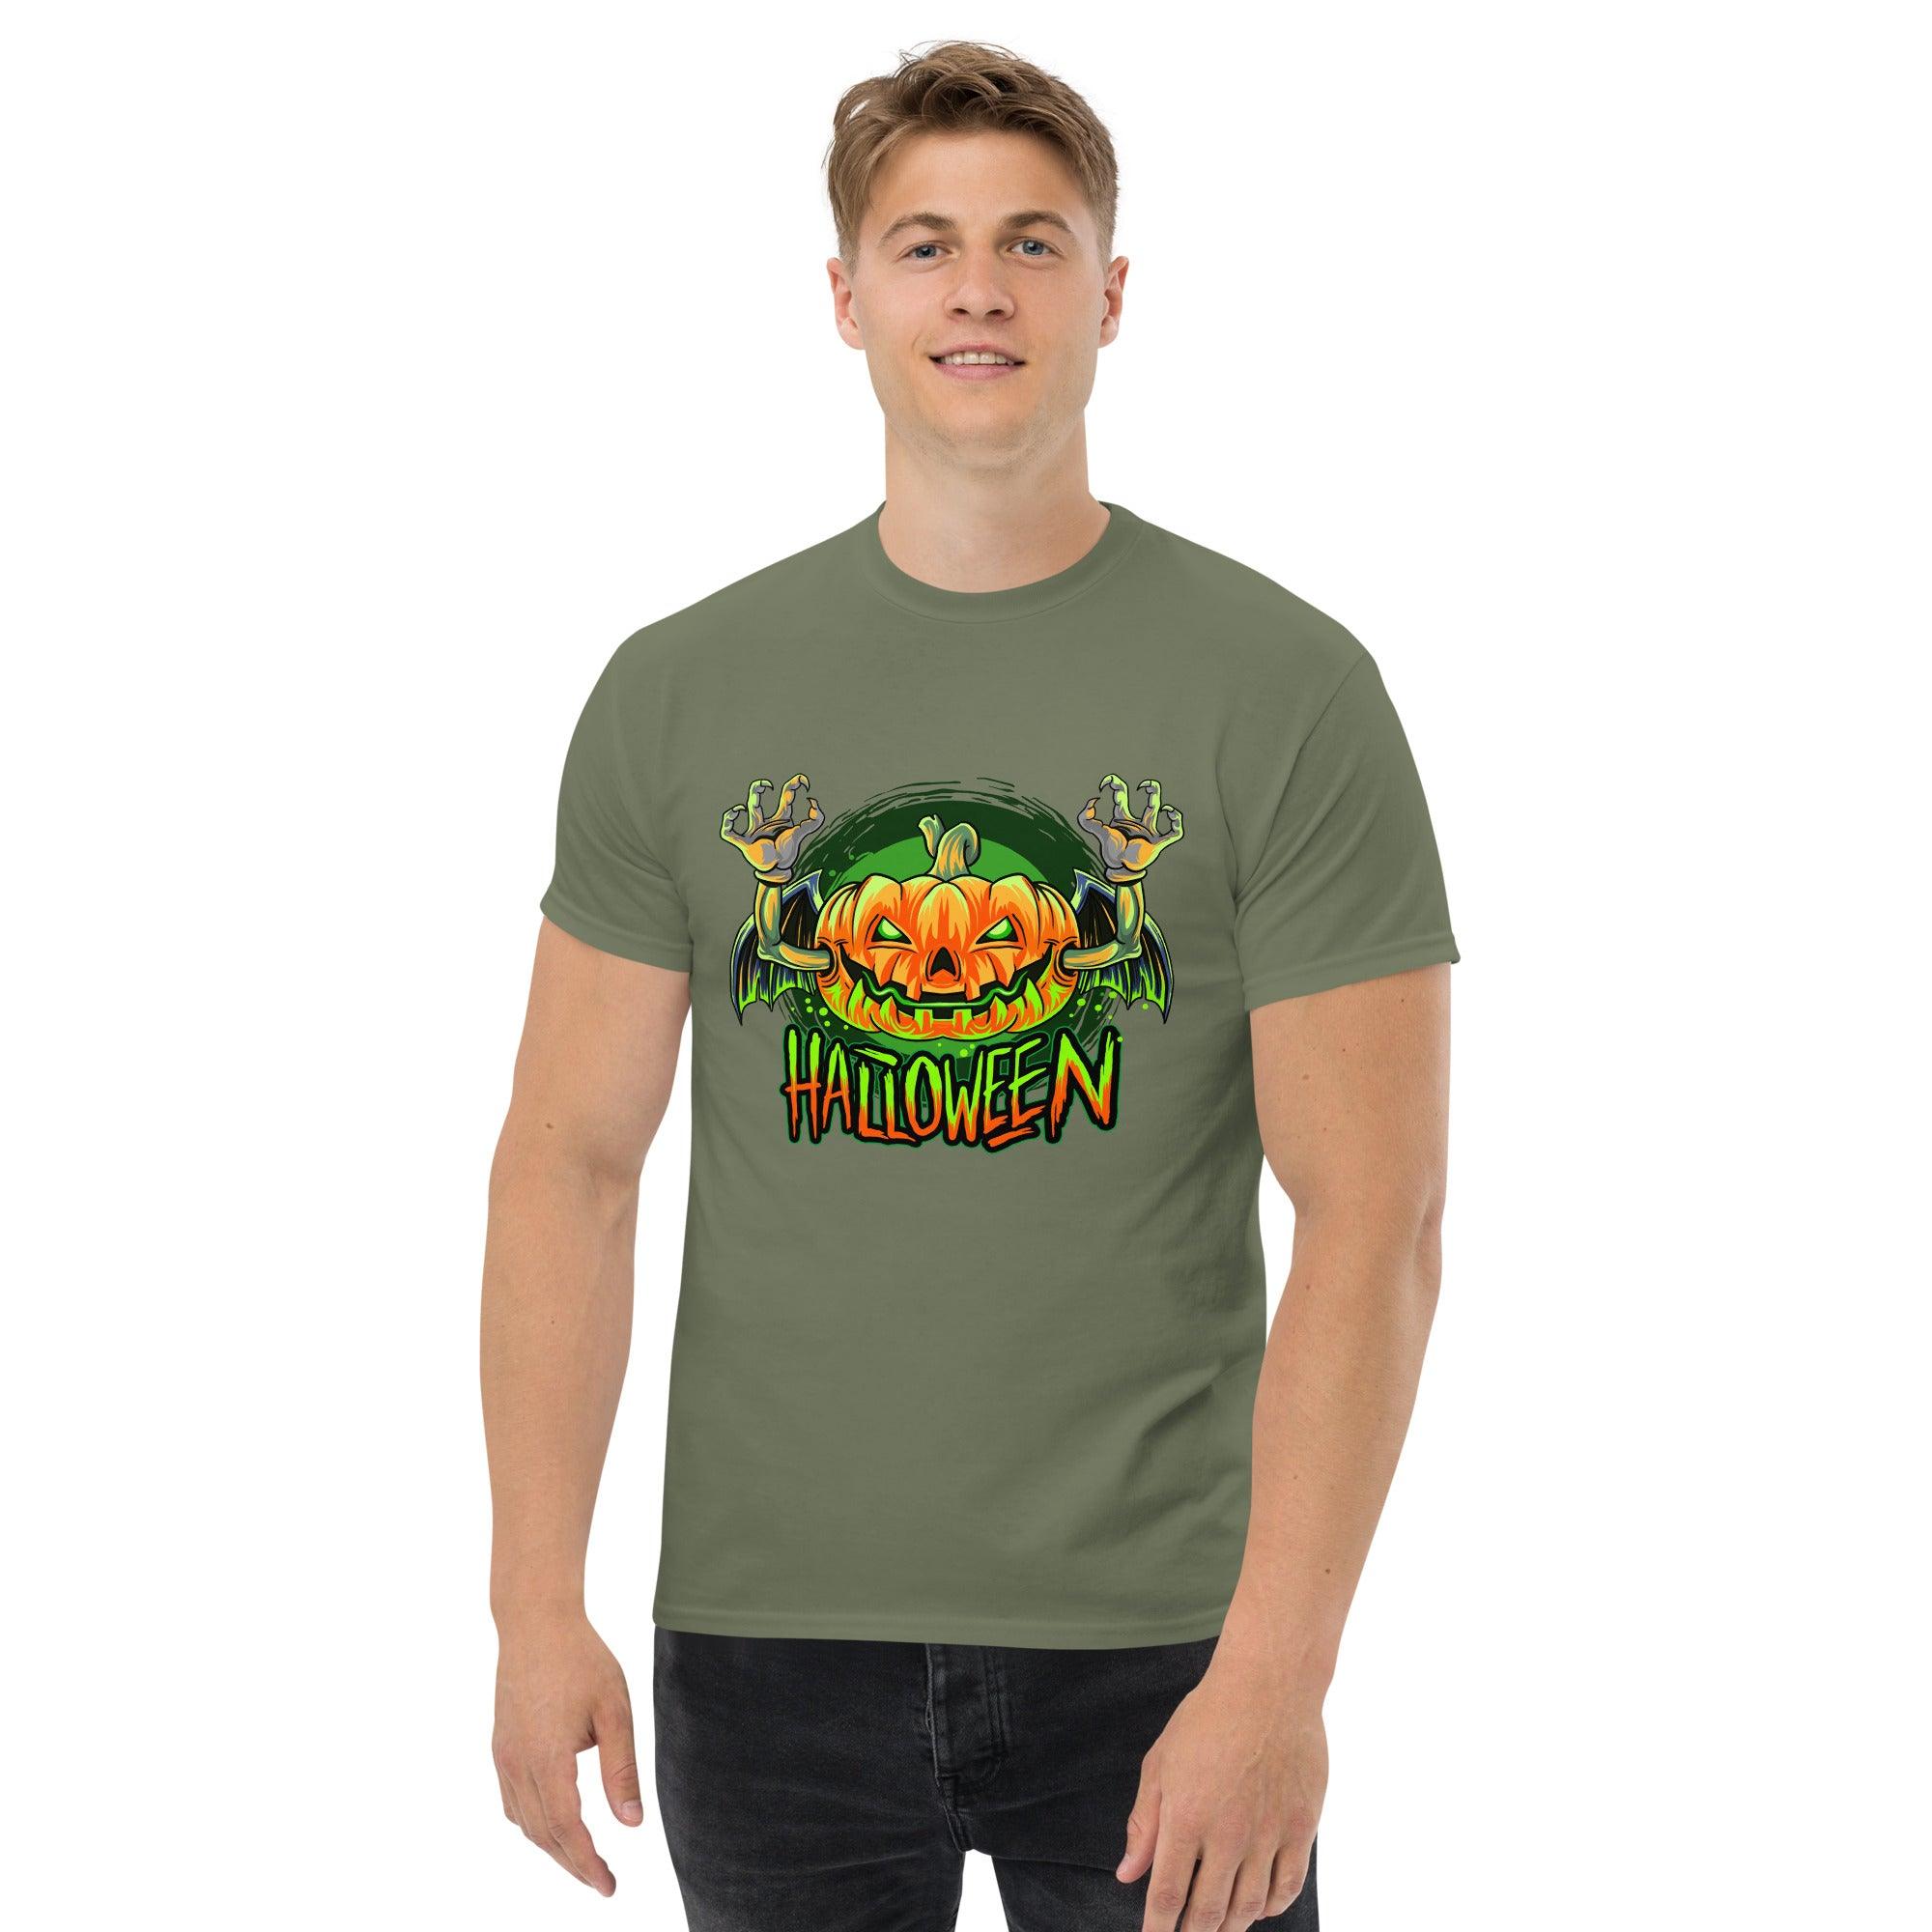 Men's Classic Tee: Ghostly Groove Halloween Edition - Beyond T-shirts